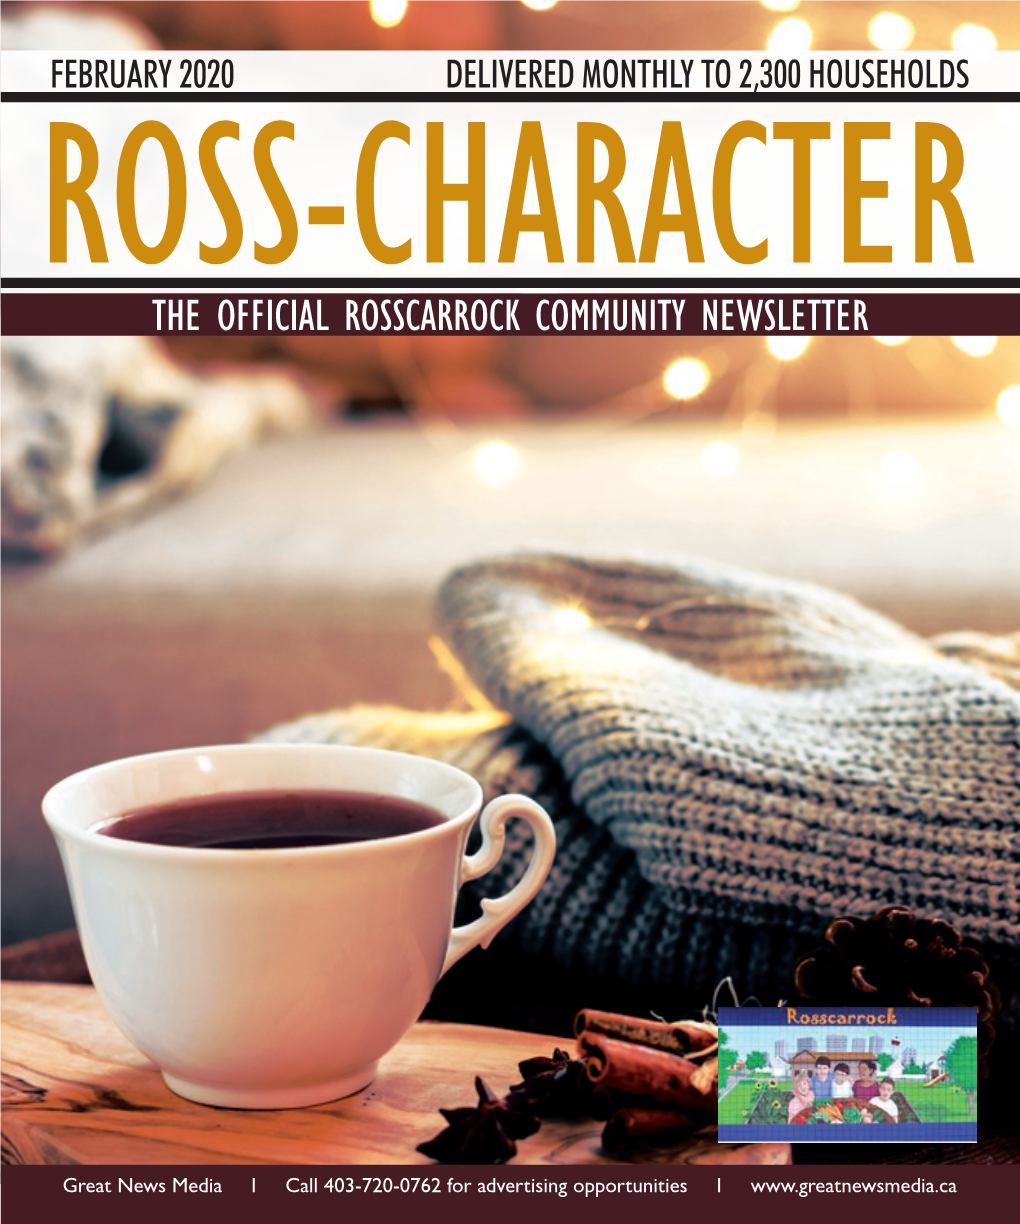 The Official Rosscarrock Community